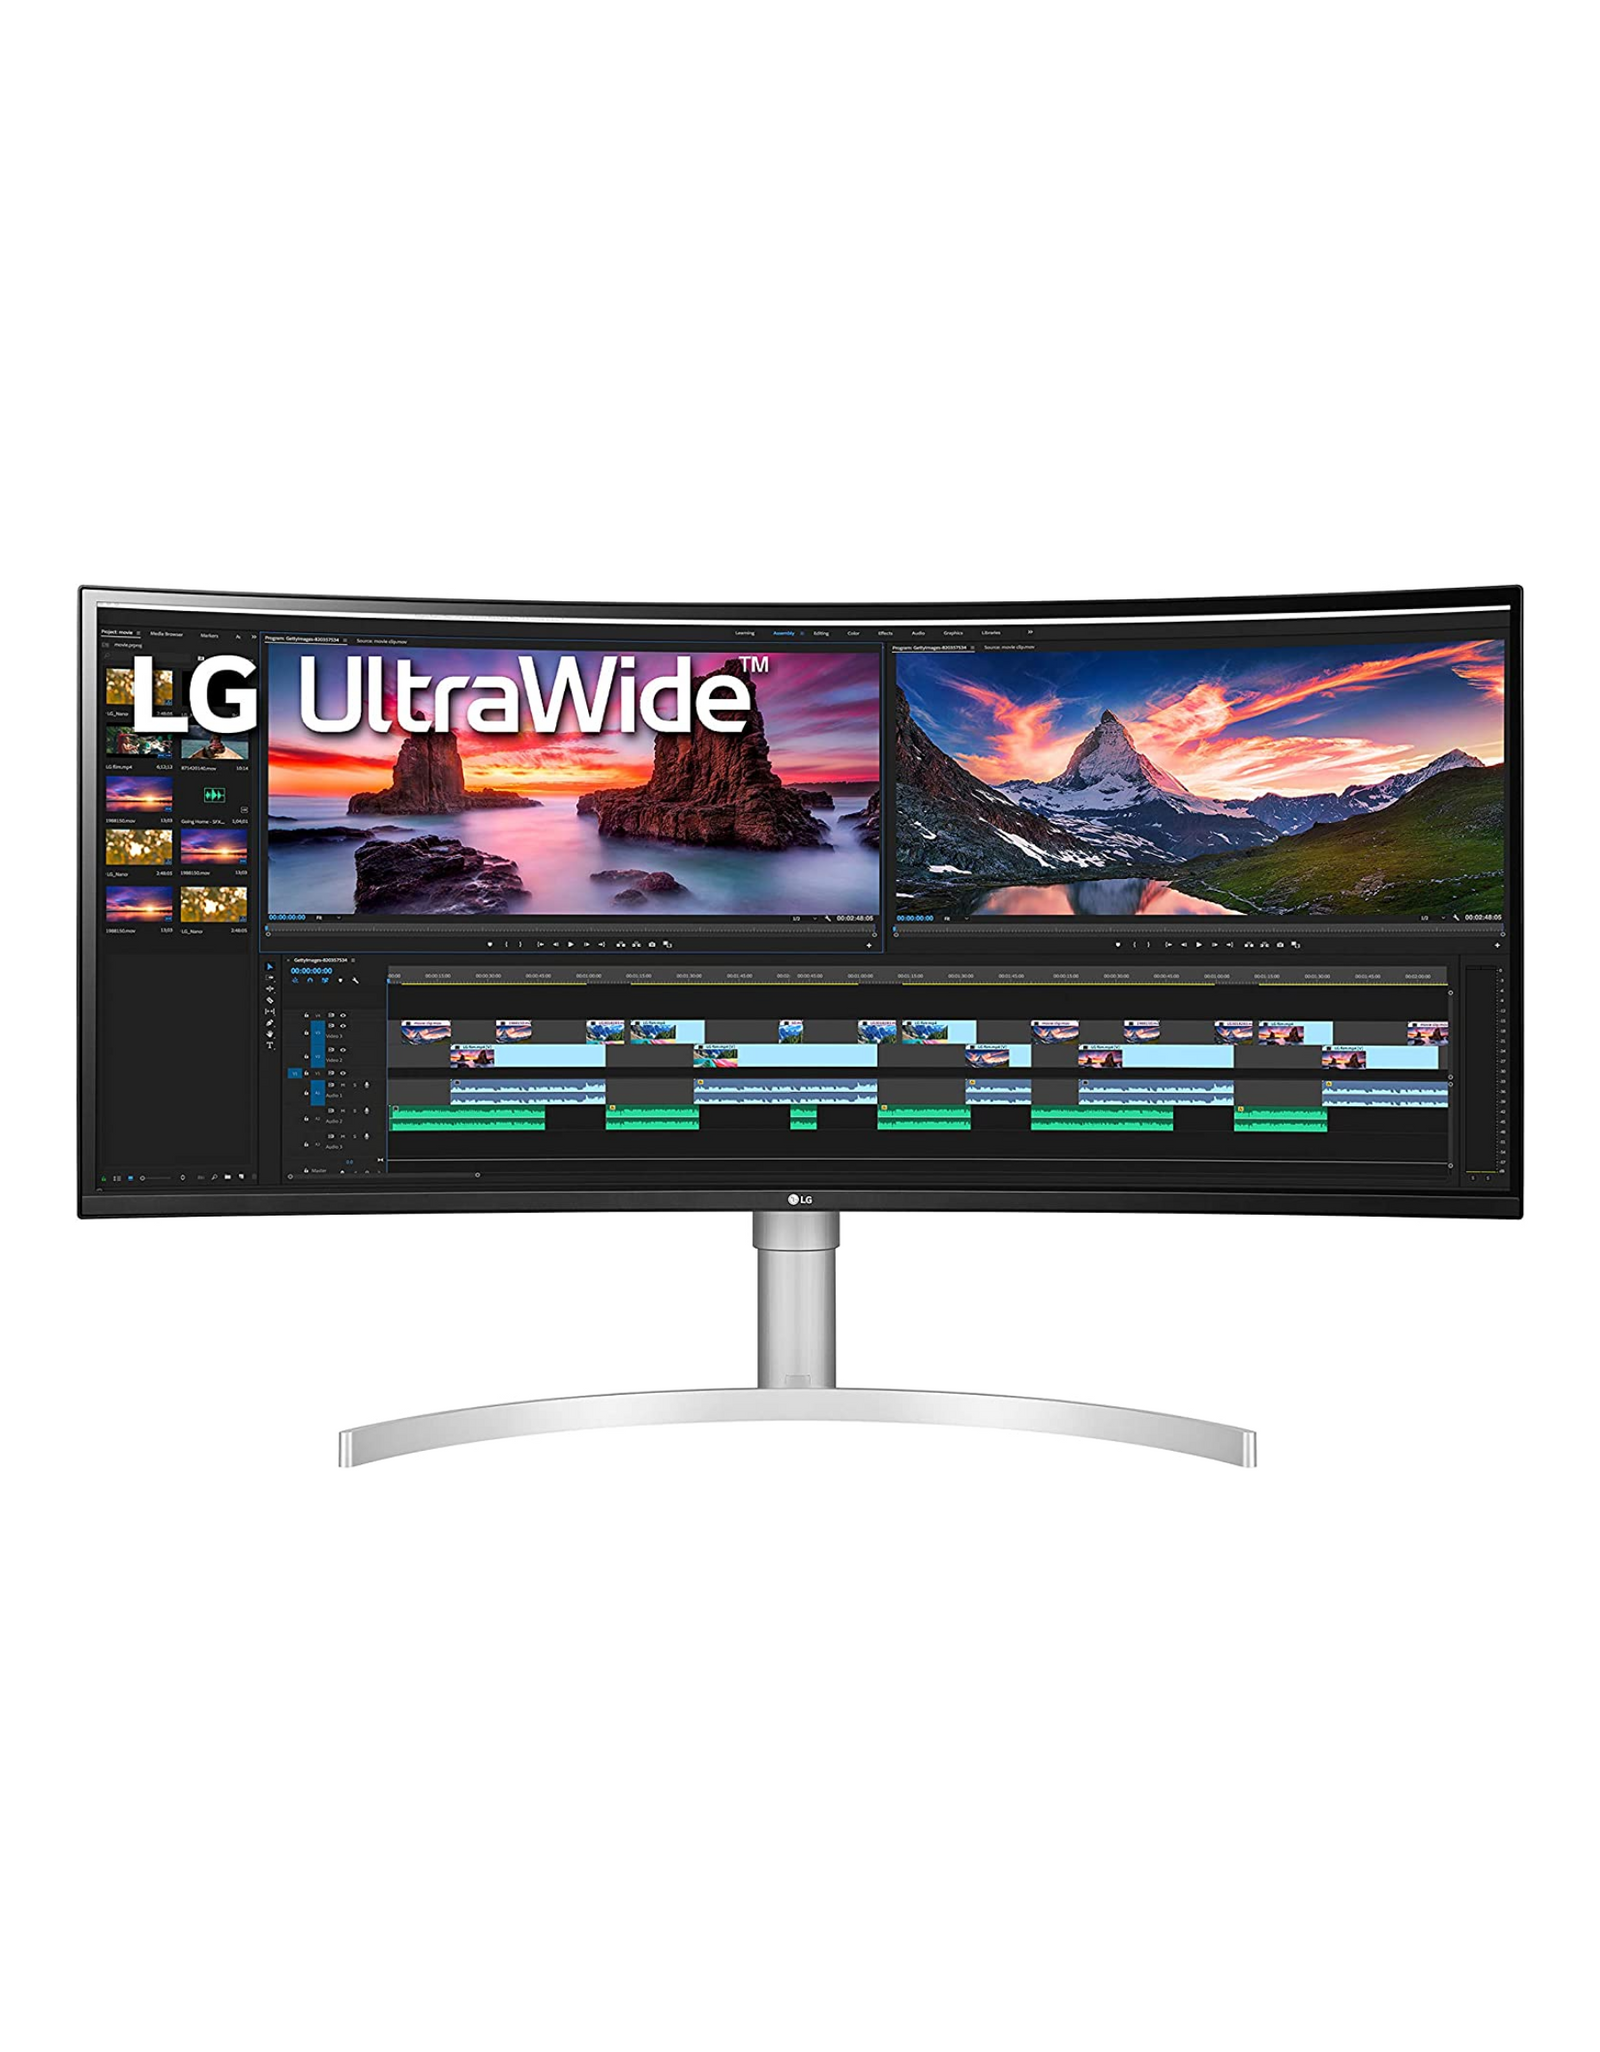 LG 38WN95C-W Monitor 38 Inch 21:9 Curved UltraWide QHD+ (3840 x 1600) Nanio IPS Display with Thunderbolt 3 and G-SYNC Compatibility